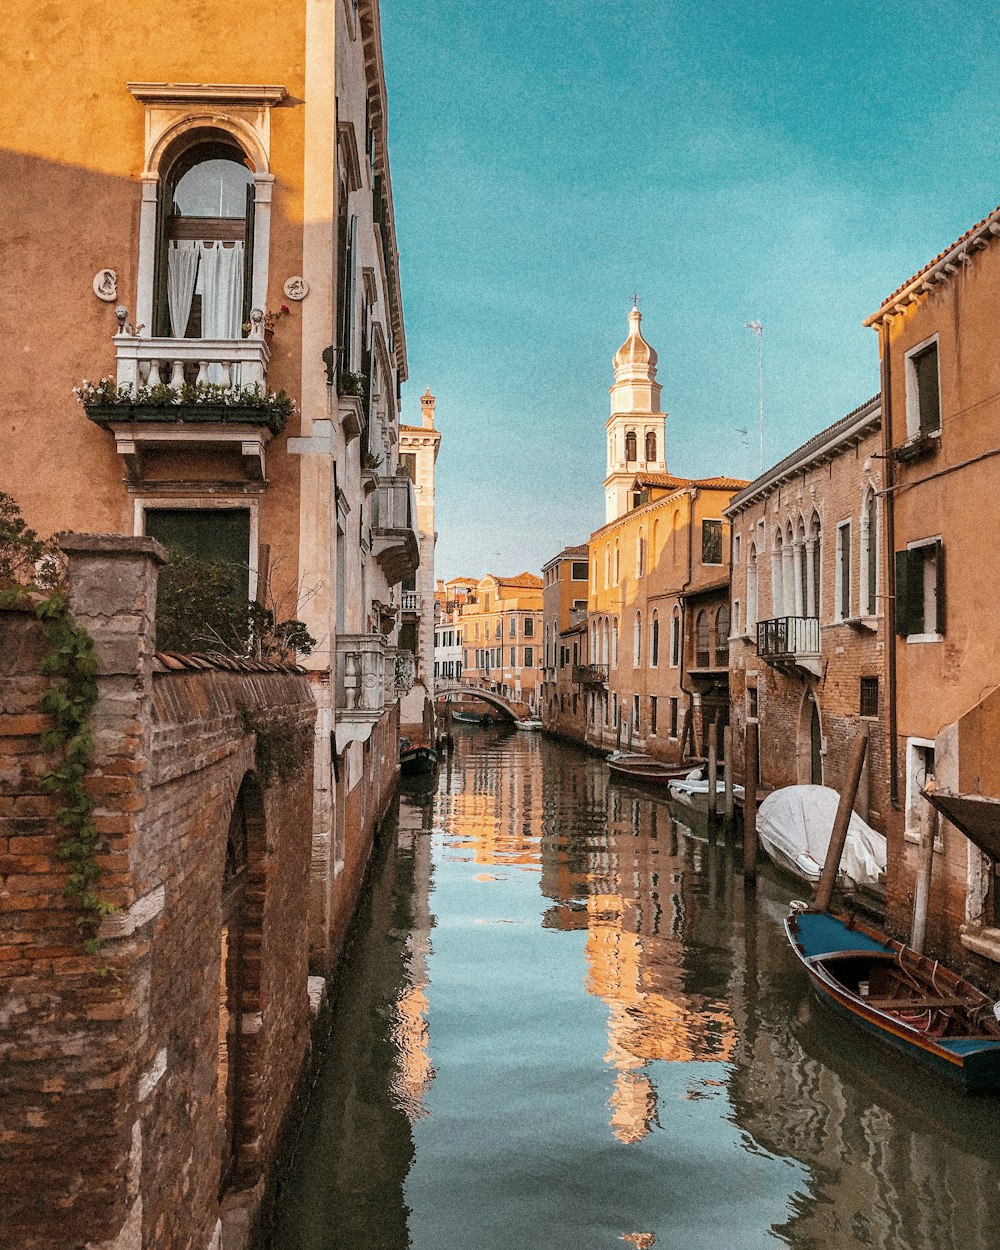 Venice Canal, Italy at daytime